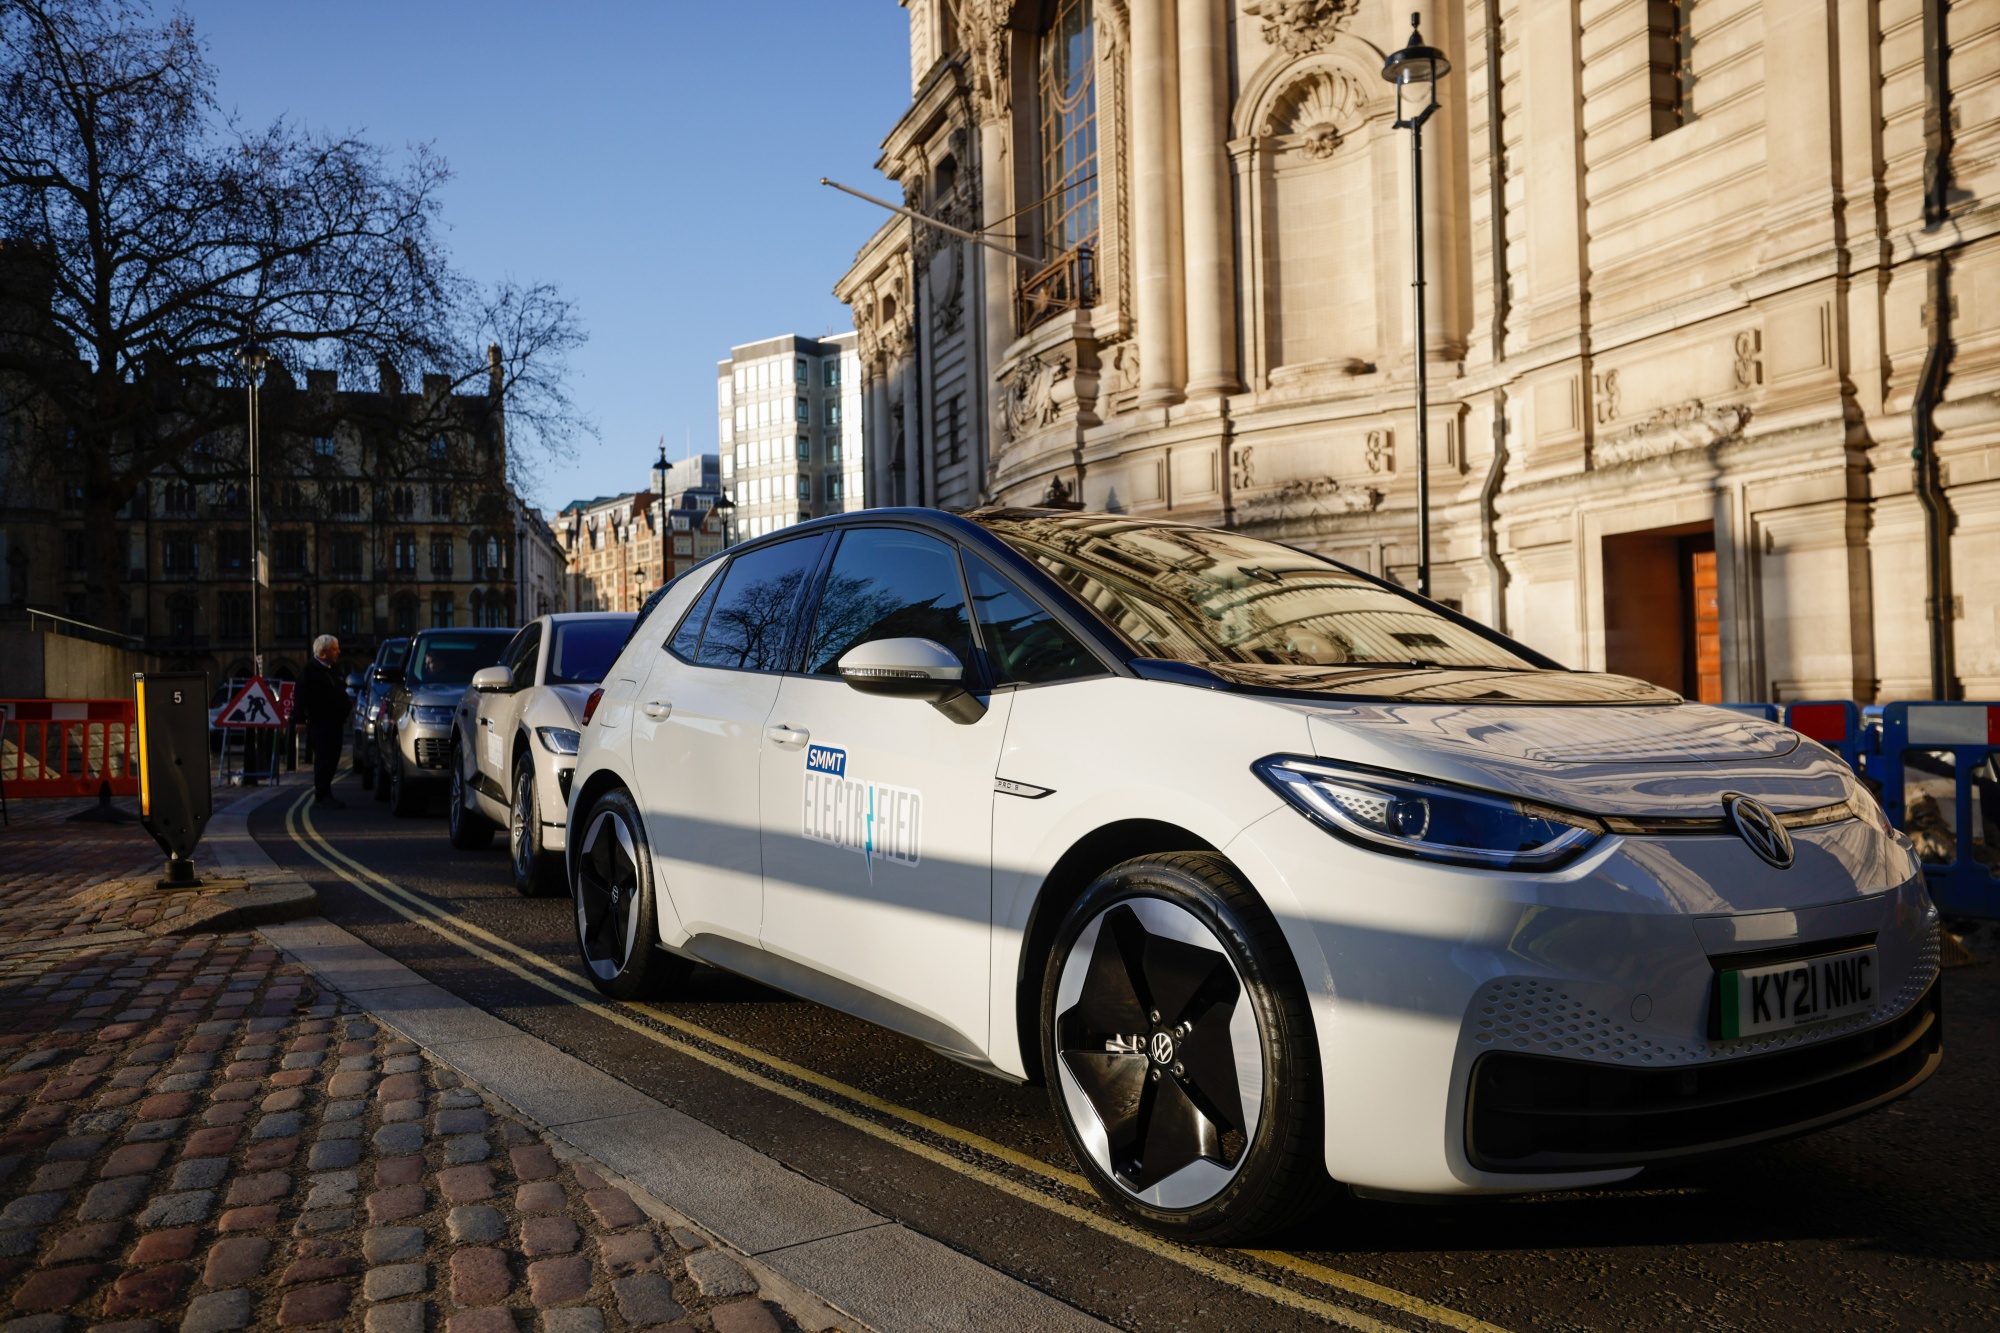 Auto Companies Push UK to Increase ElectricCar Incentives Bloomberg